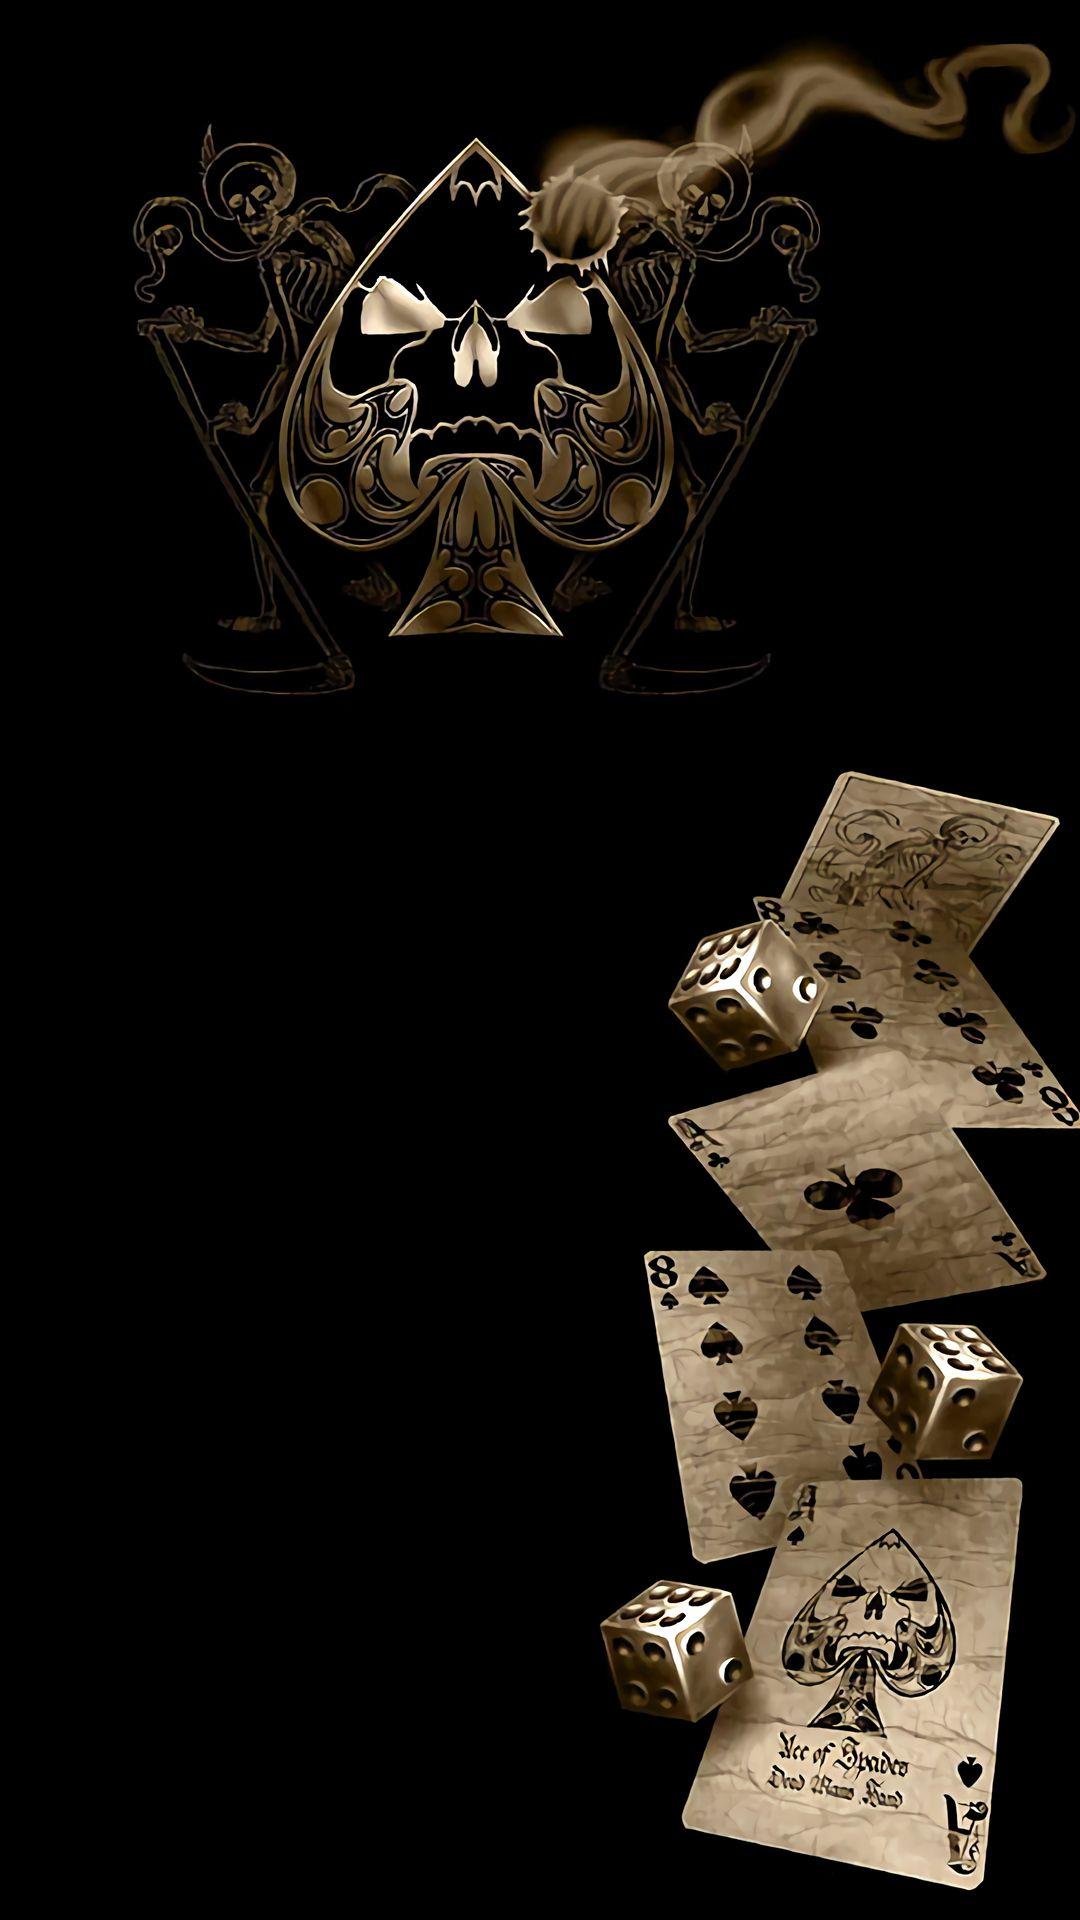 Playing Card 1920X1080 Wallpapers